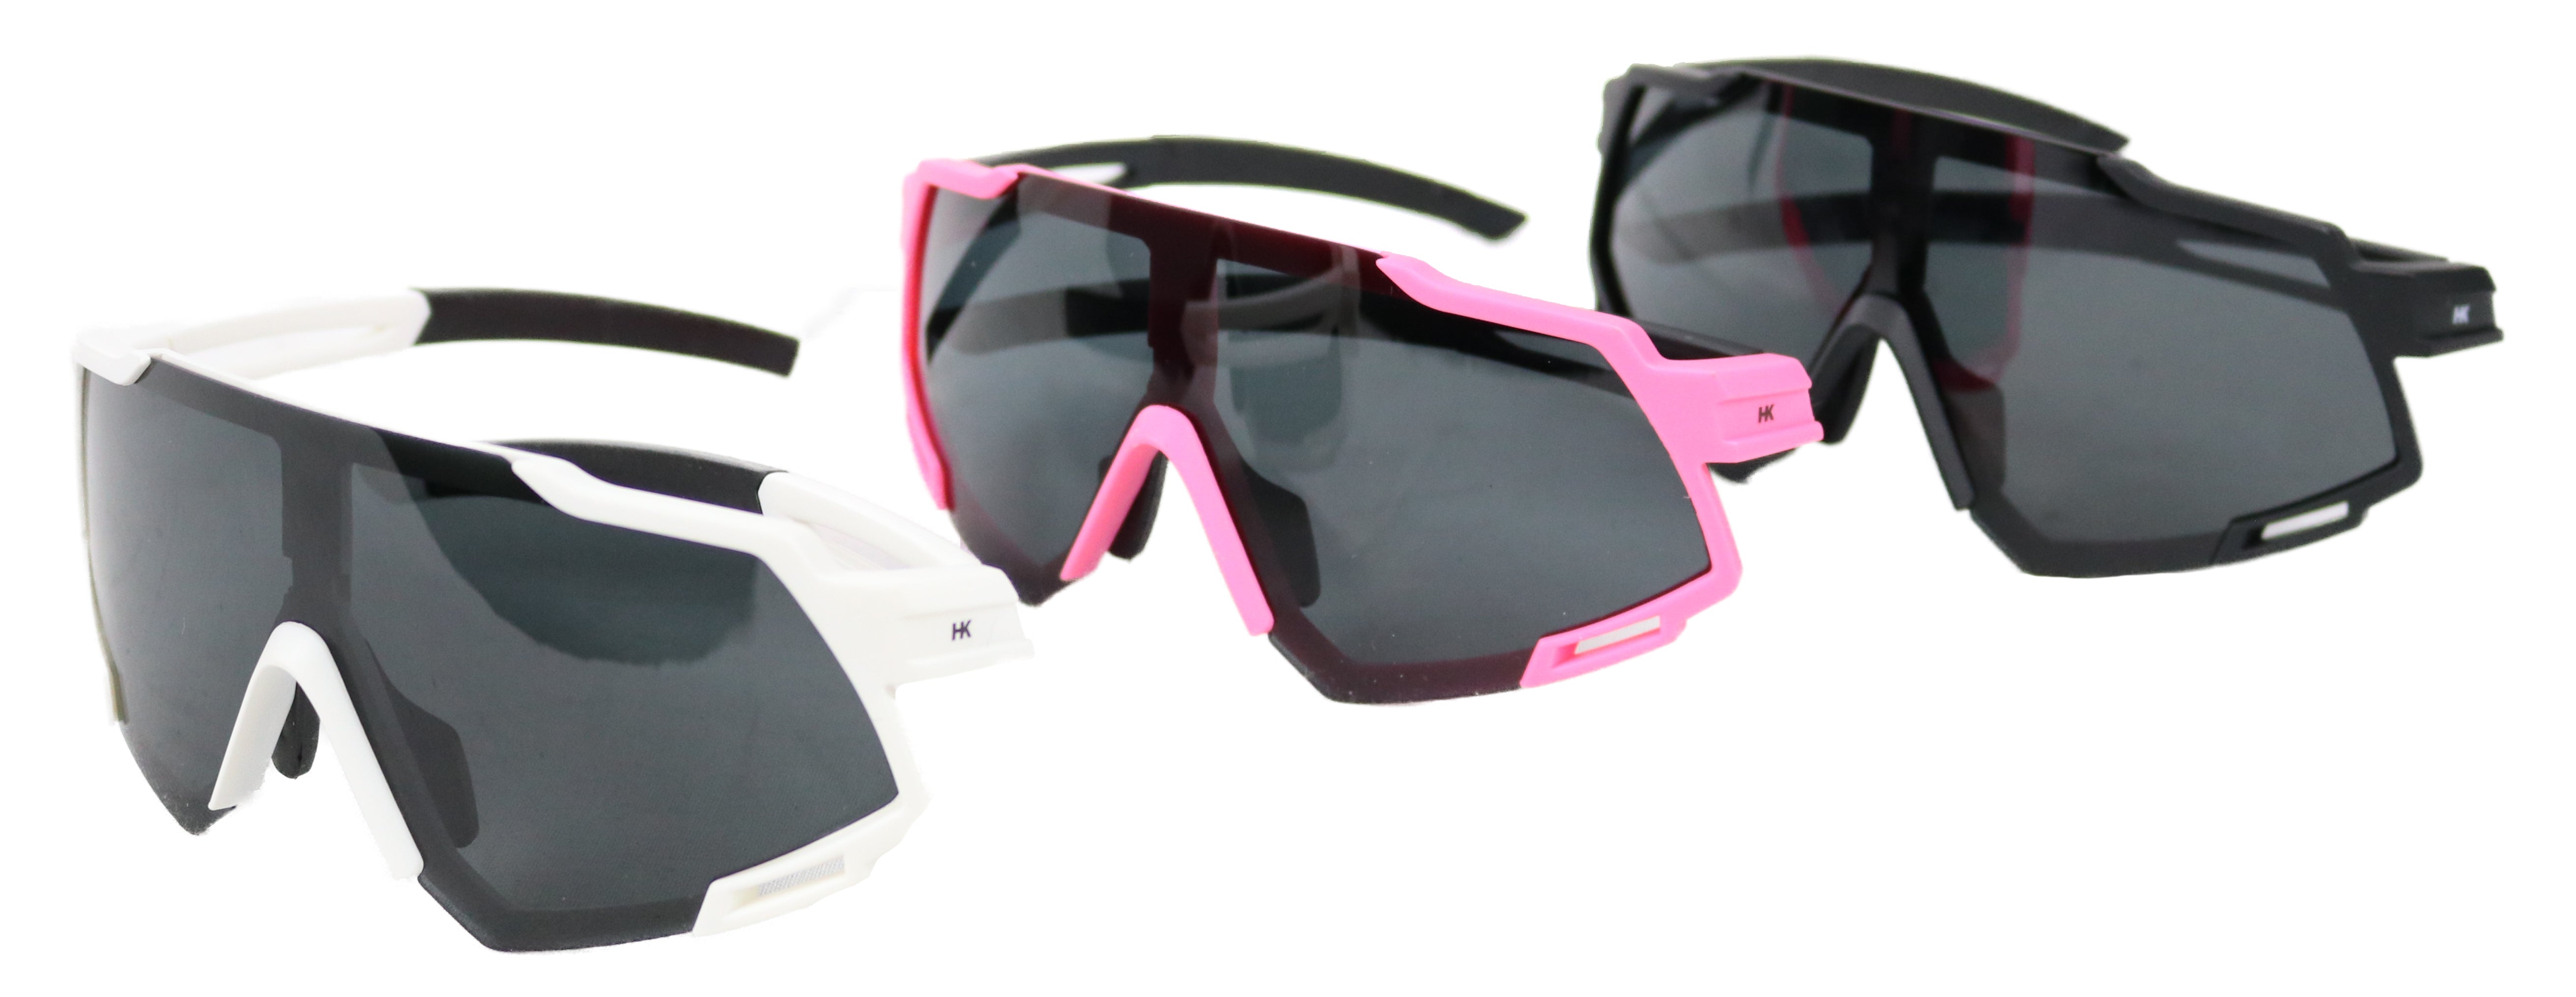 The McFly Unisex Sunglasses by Hill Killer